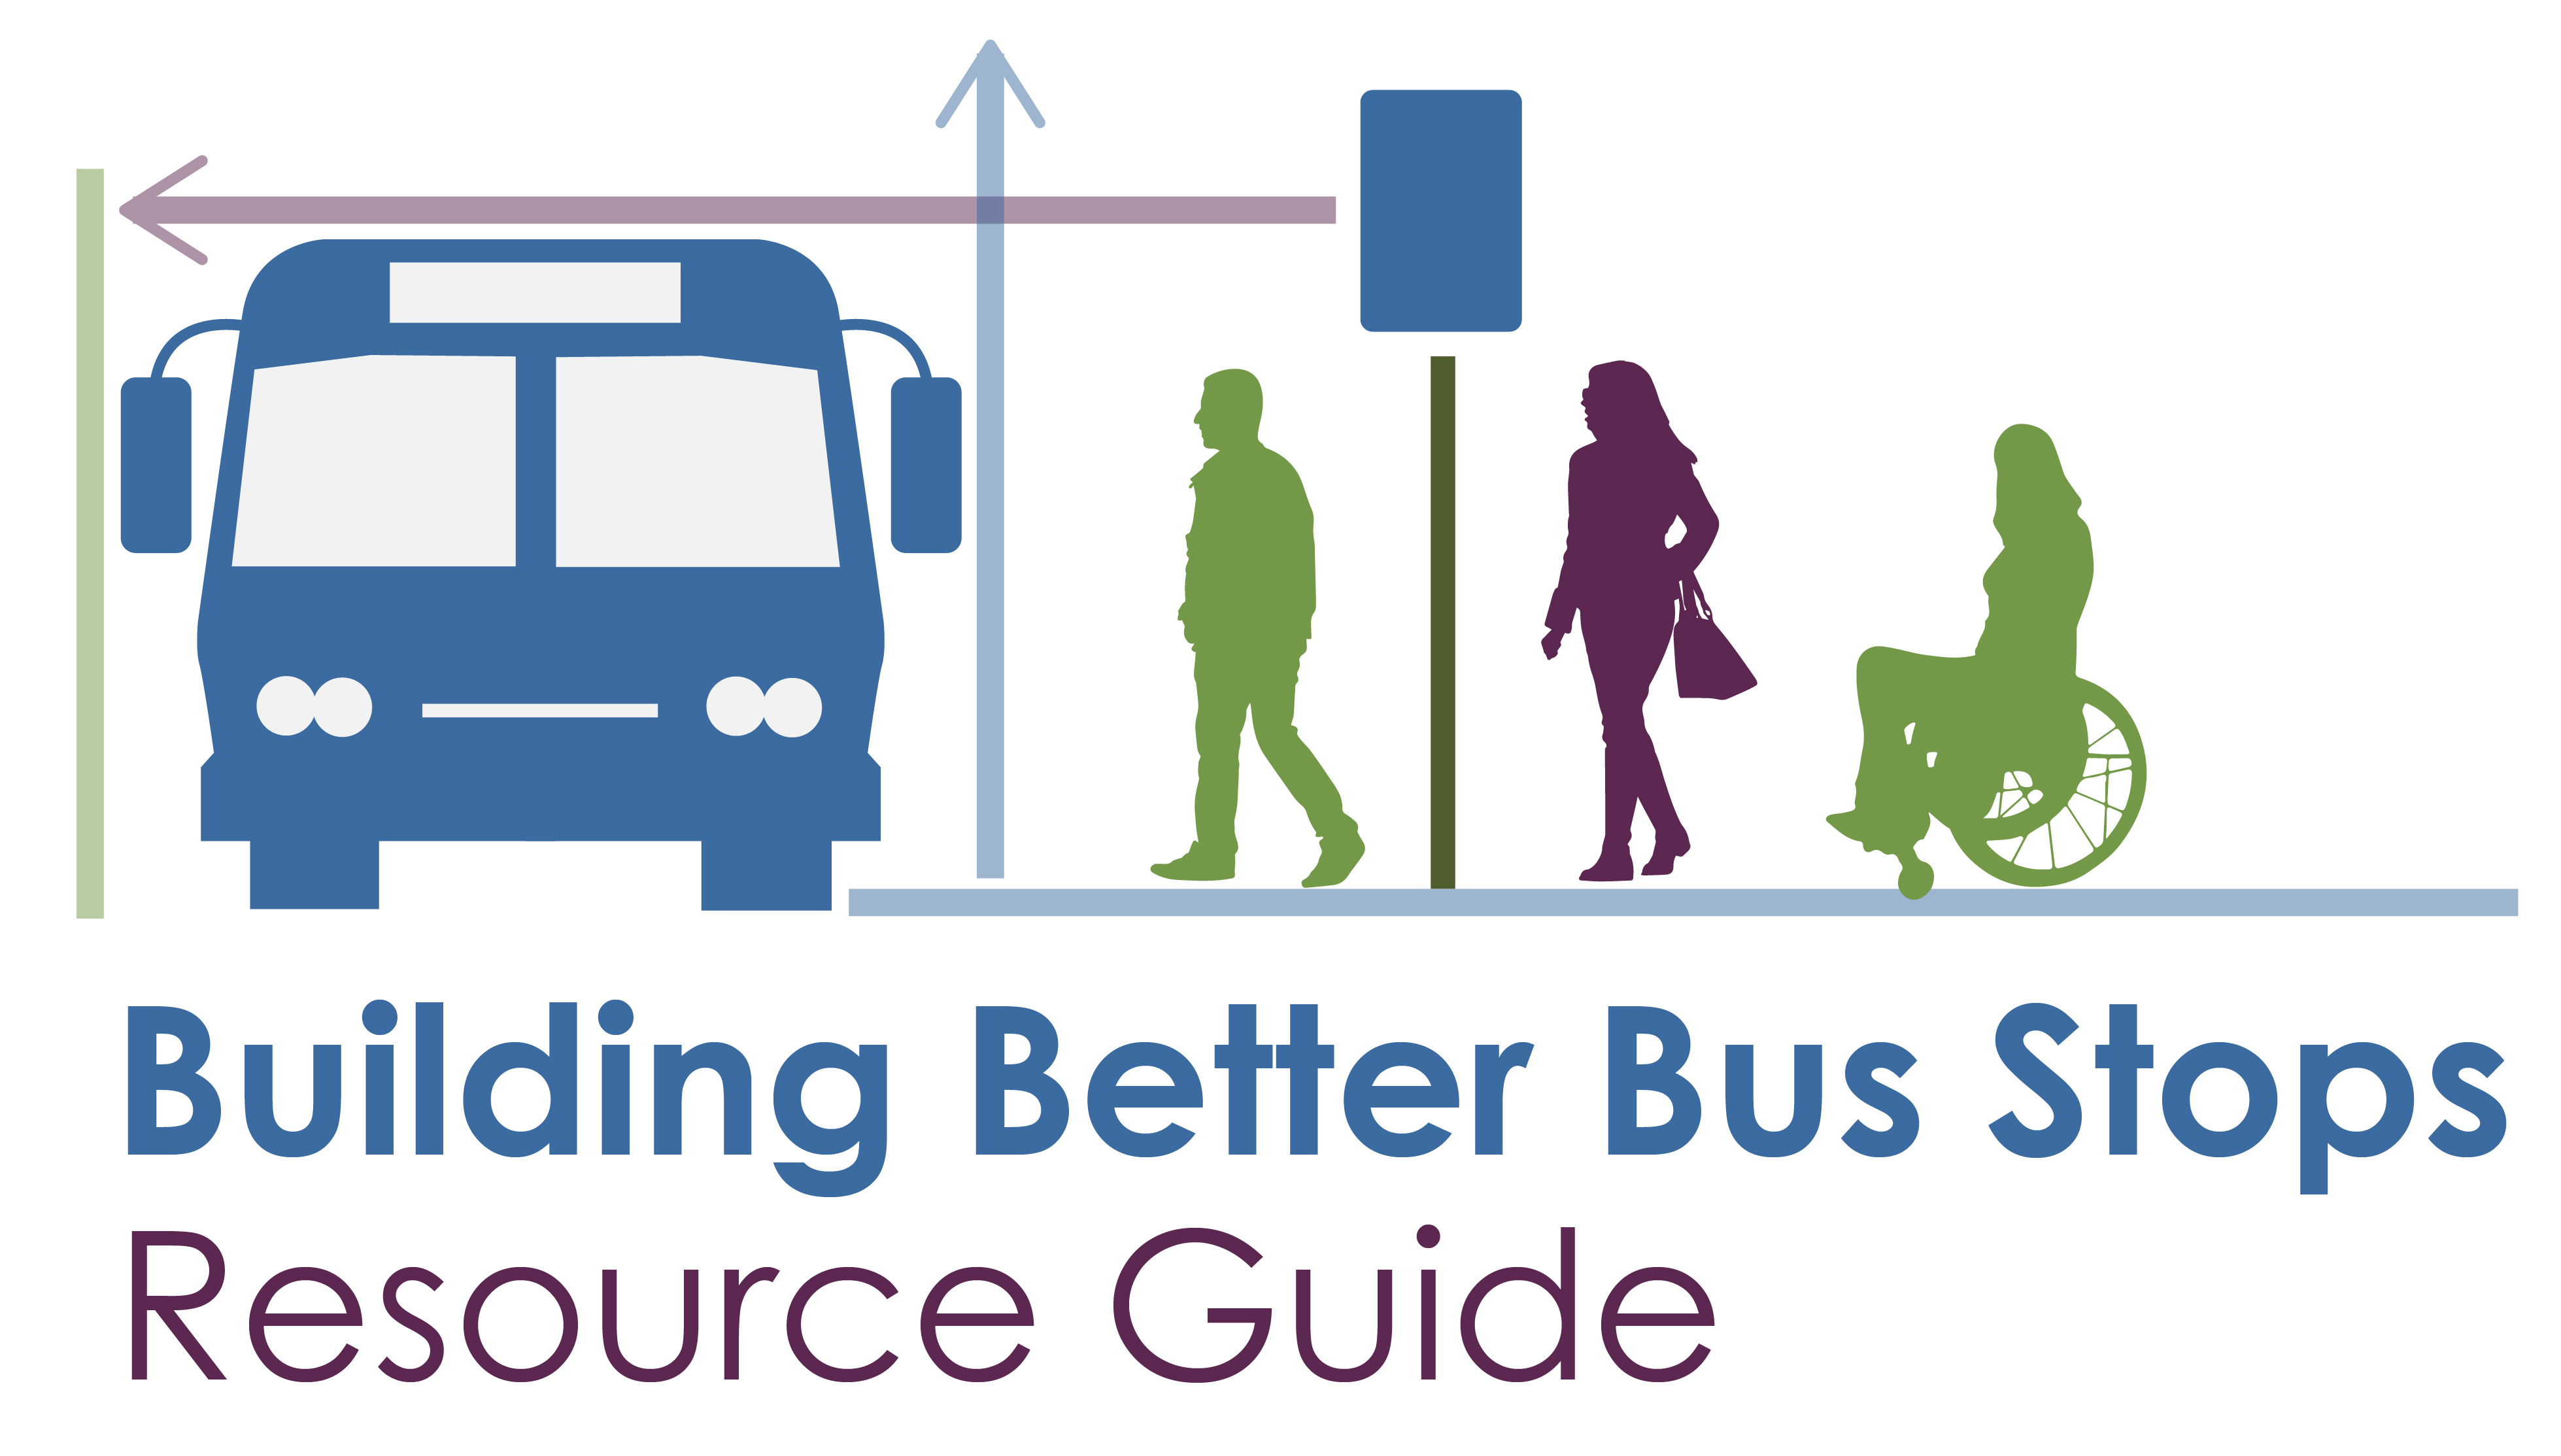 Illustration of a bus stop in silhouette with the text [Building Better Bus Stops Resource Guide]